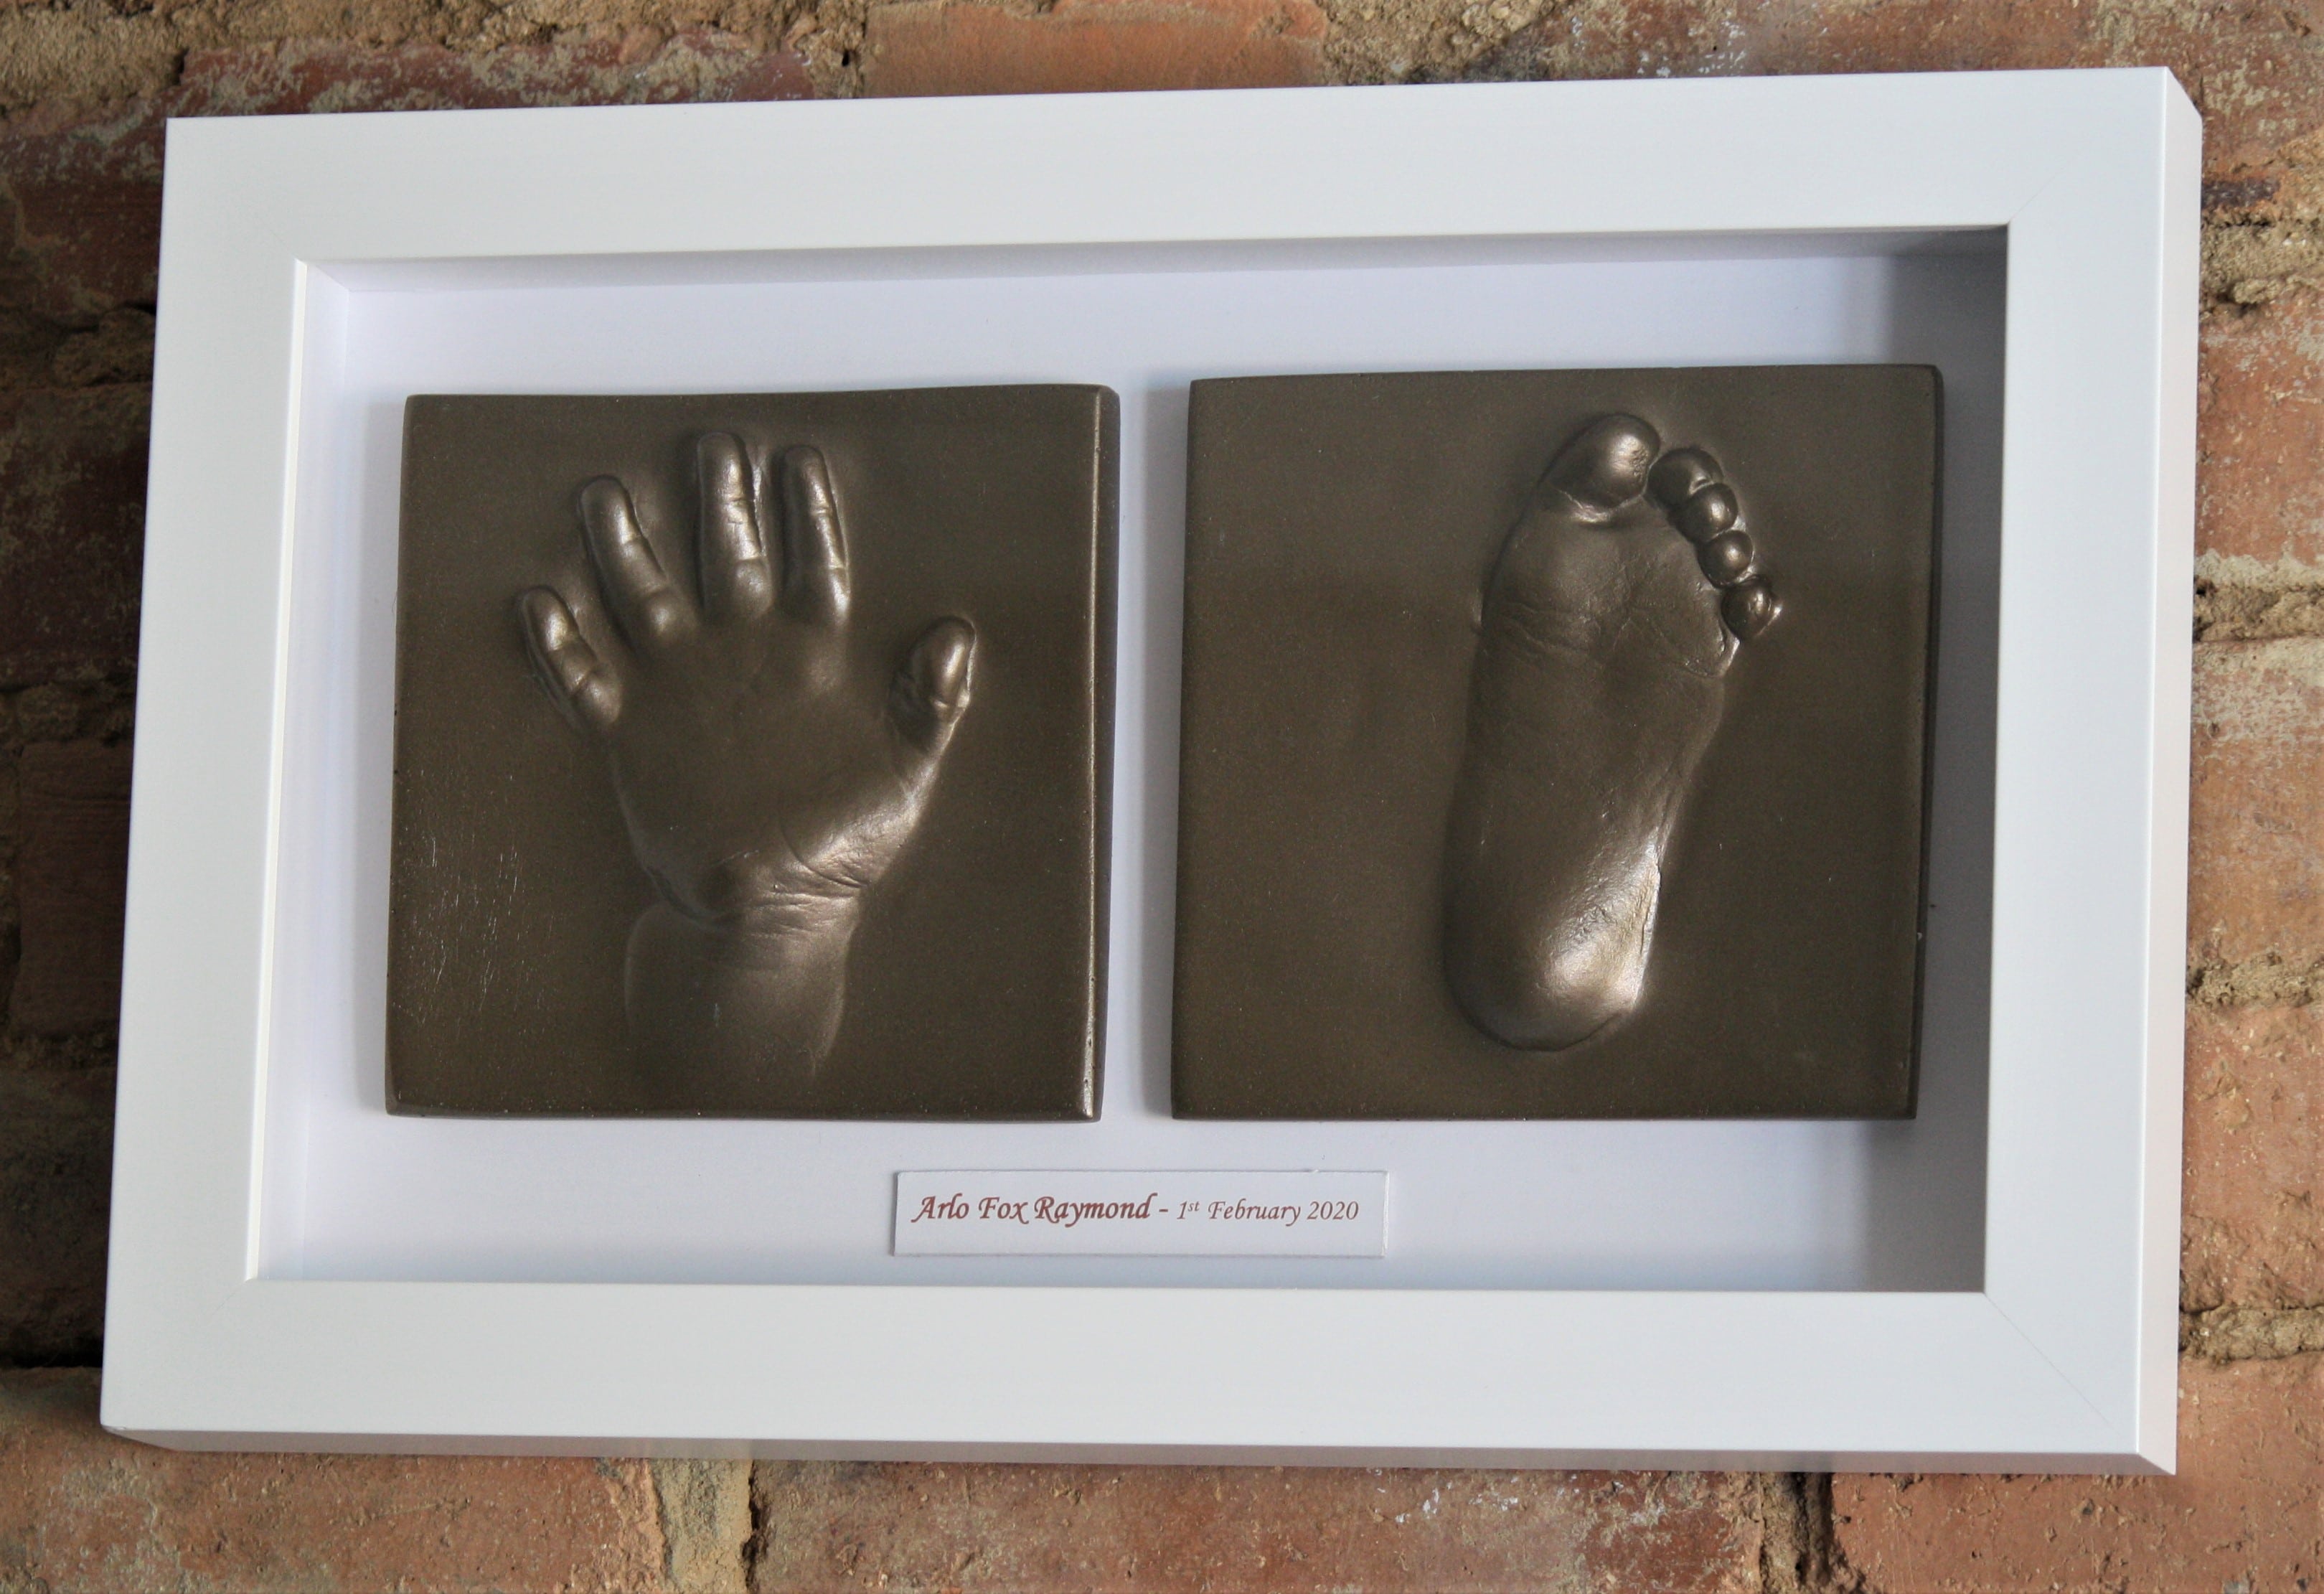 2d hand and foot impression tile of a toddler